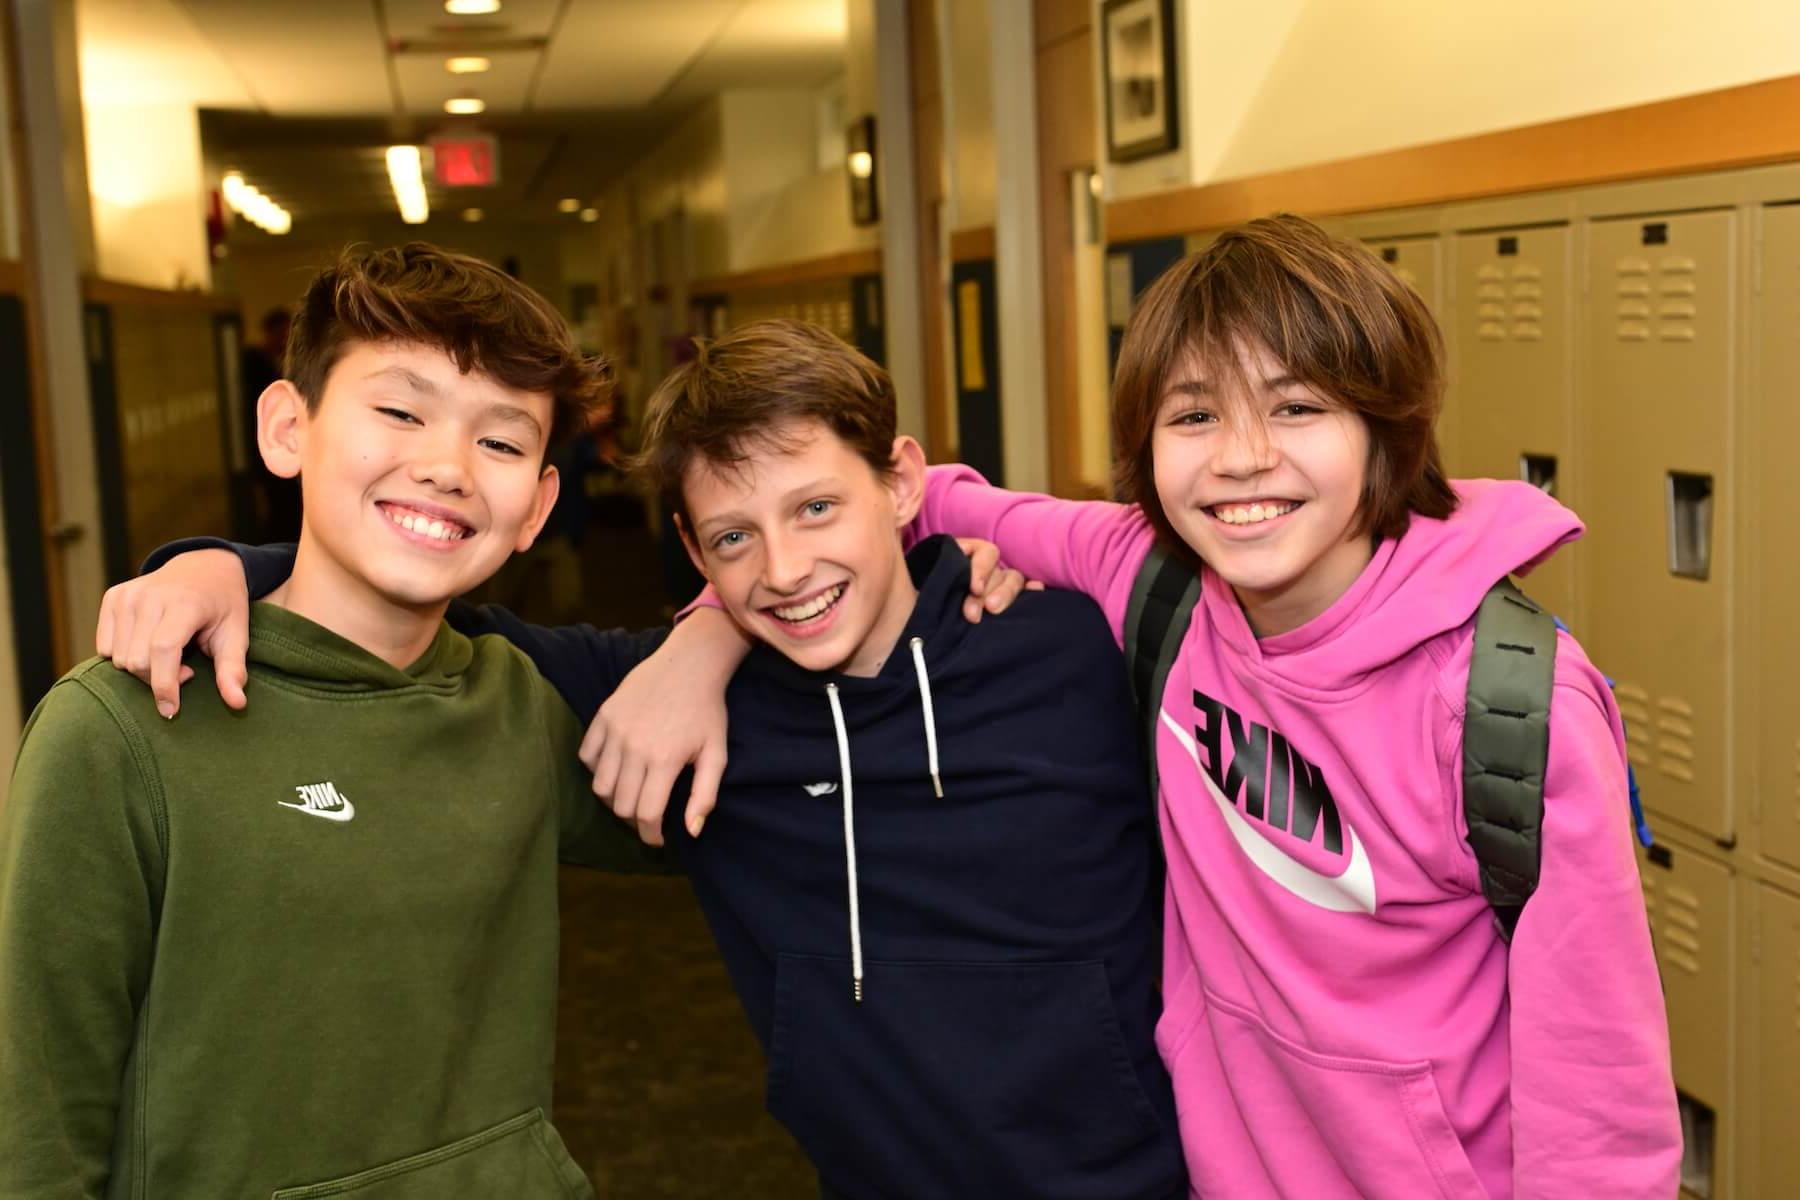 Ethical Culture Fieldston School students in Fieldston Middle smiling at the camera